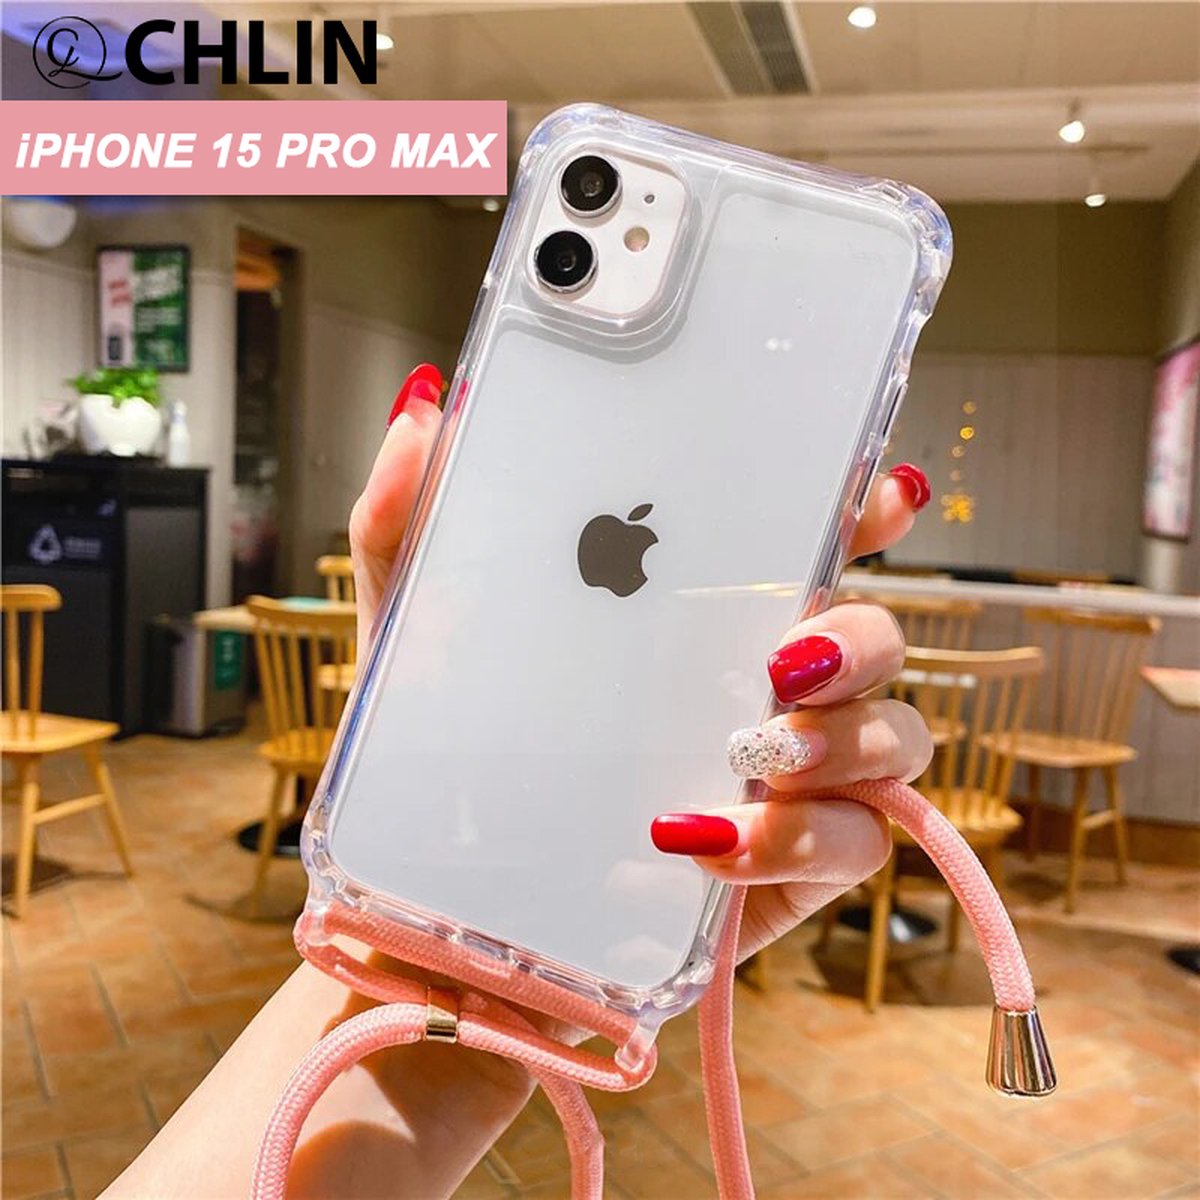 CL CHLIN® - iPhone 15 Pro Max transparant hoesje met Roze koord - Hoesje met koord iPhone 15 Pro Max - iPhone 15 Pro Max case - iPhone 15 Pro Max hoes - iPhone hoesje met cord - iPhone 15 Pro Max bescherming - iPhone 15 Pro Max protector